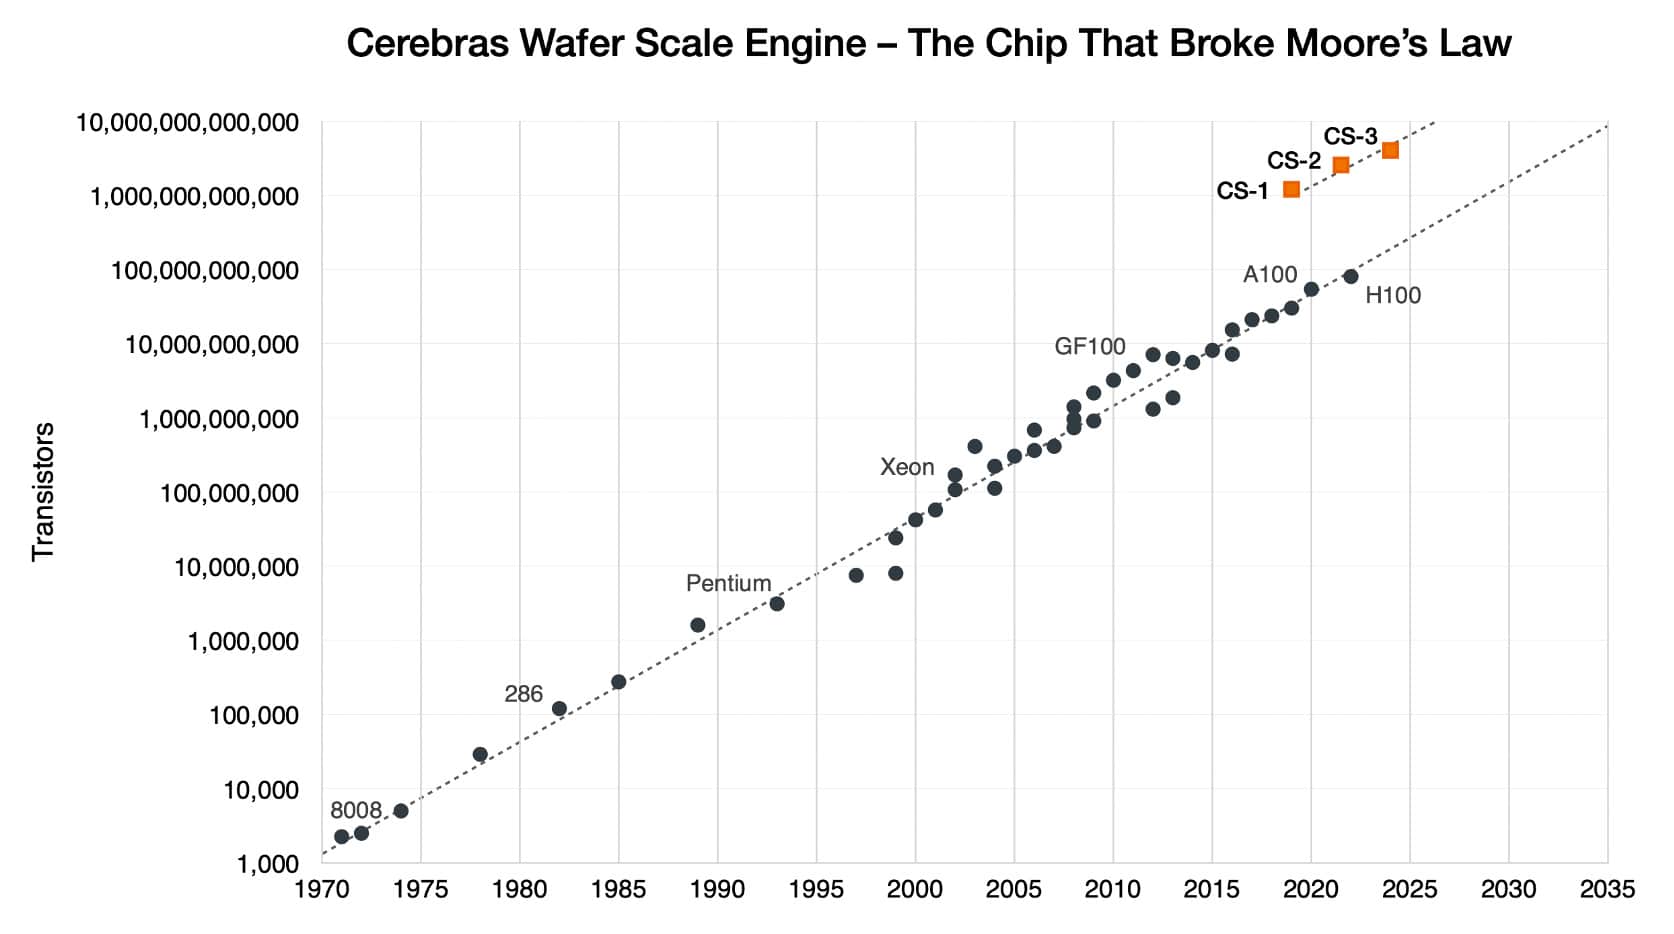 Cerebras WSE 3 Wafer Scale Engine Chip chart